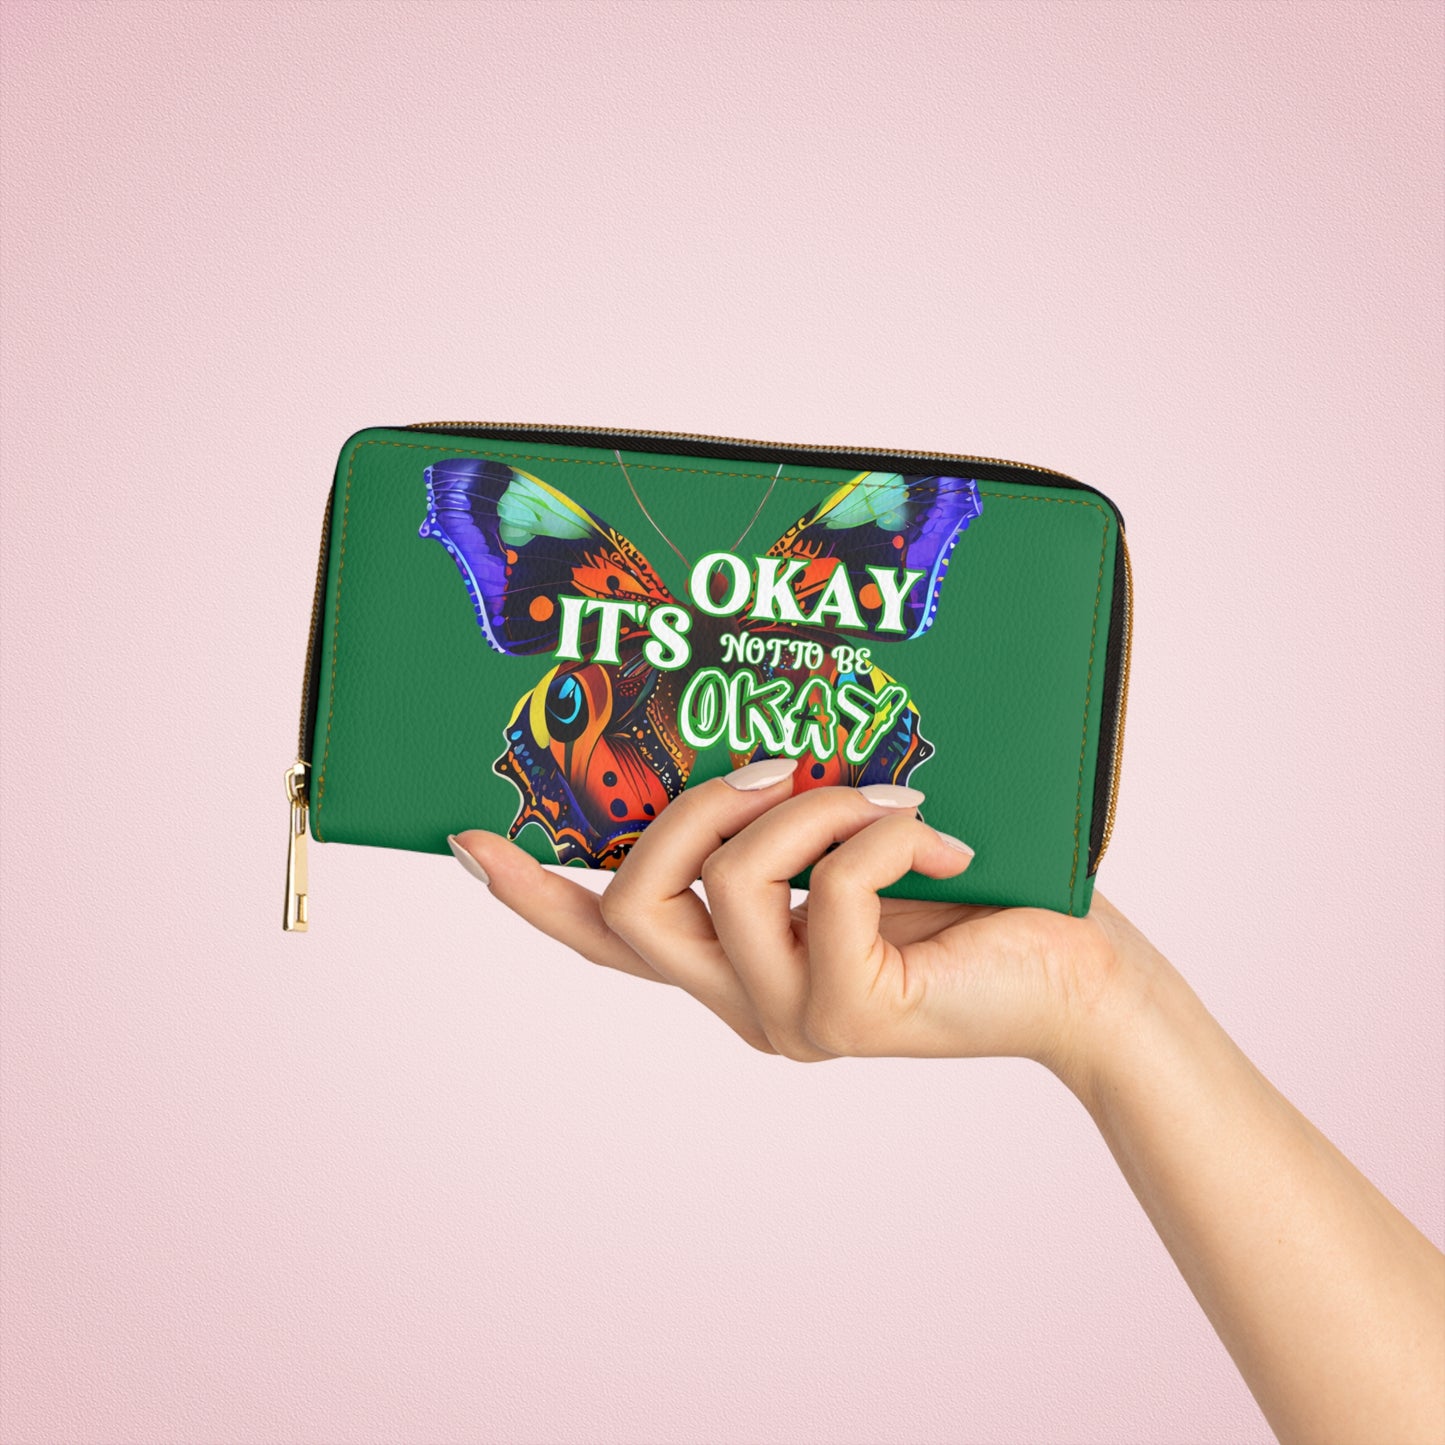 IT’S OKAY, NOT TO BE OKAY- Positive Afrocentric Affirmation Vegan Leather Wallet Bag- Empower Your Style and Self-Love ; Butterfly Green Wallet